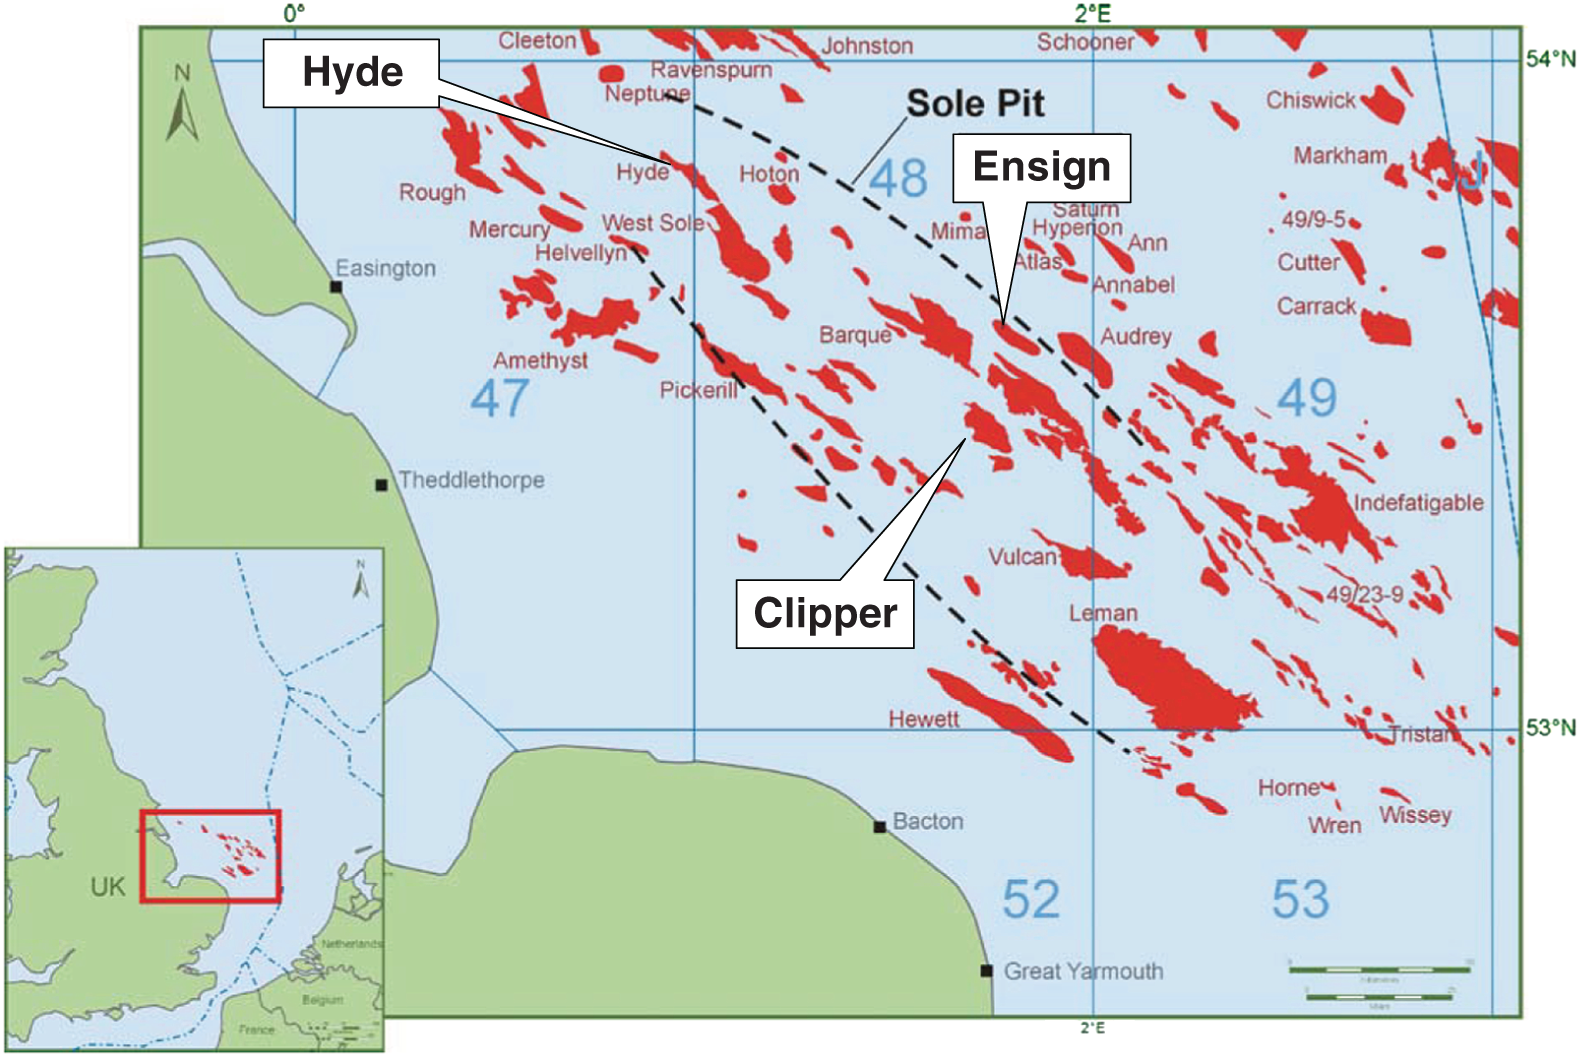 Map depicting Hyde, Clipper, and Ensign gas fields, UK North Sea, have a low permeability reservoir and contain some naturally open fractures.